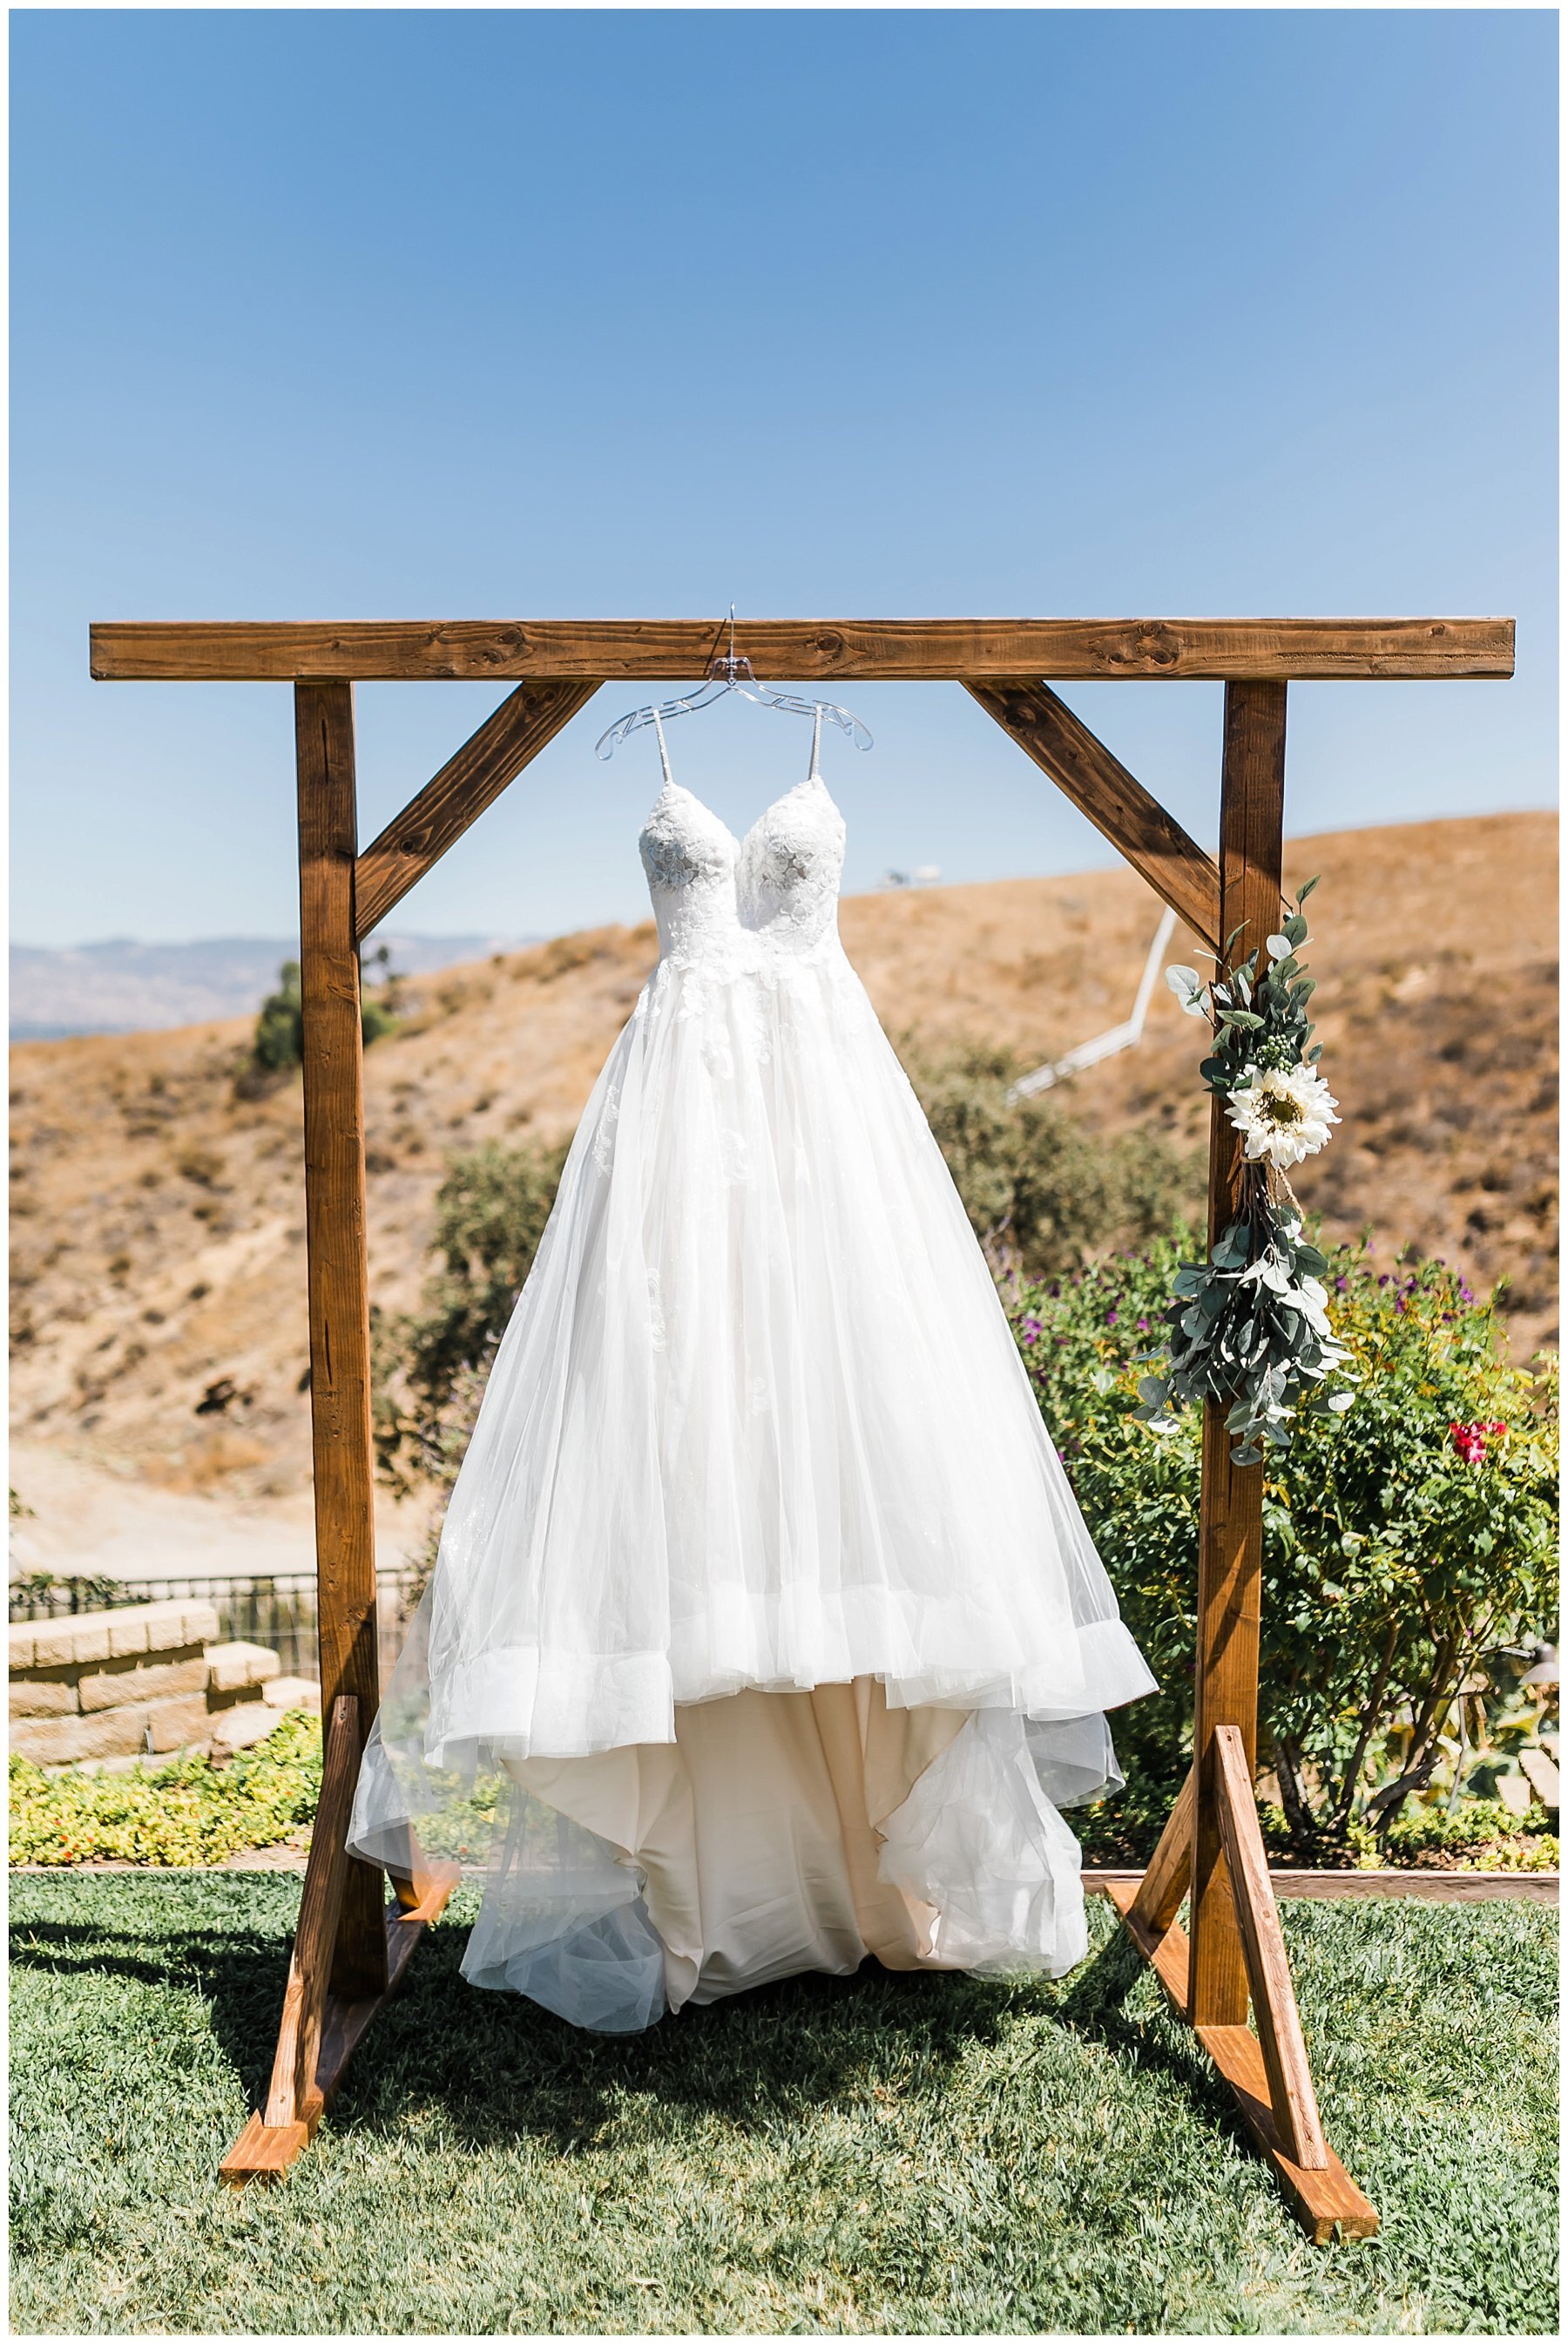  gown hanging on the wooden altar 